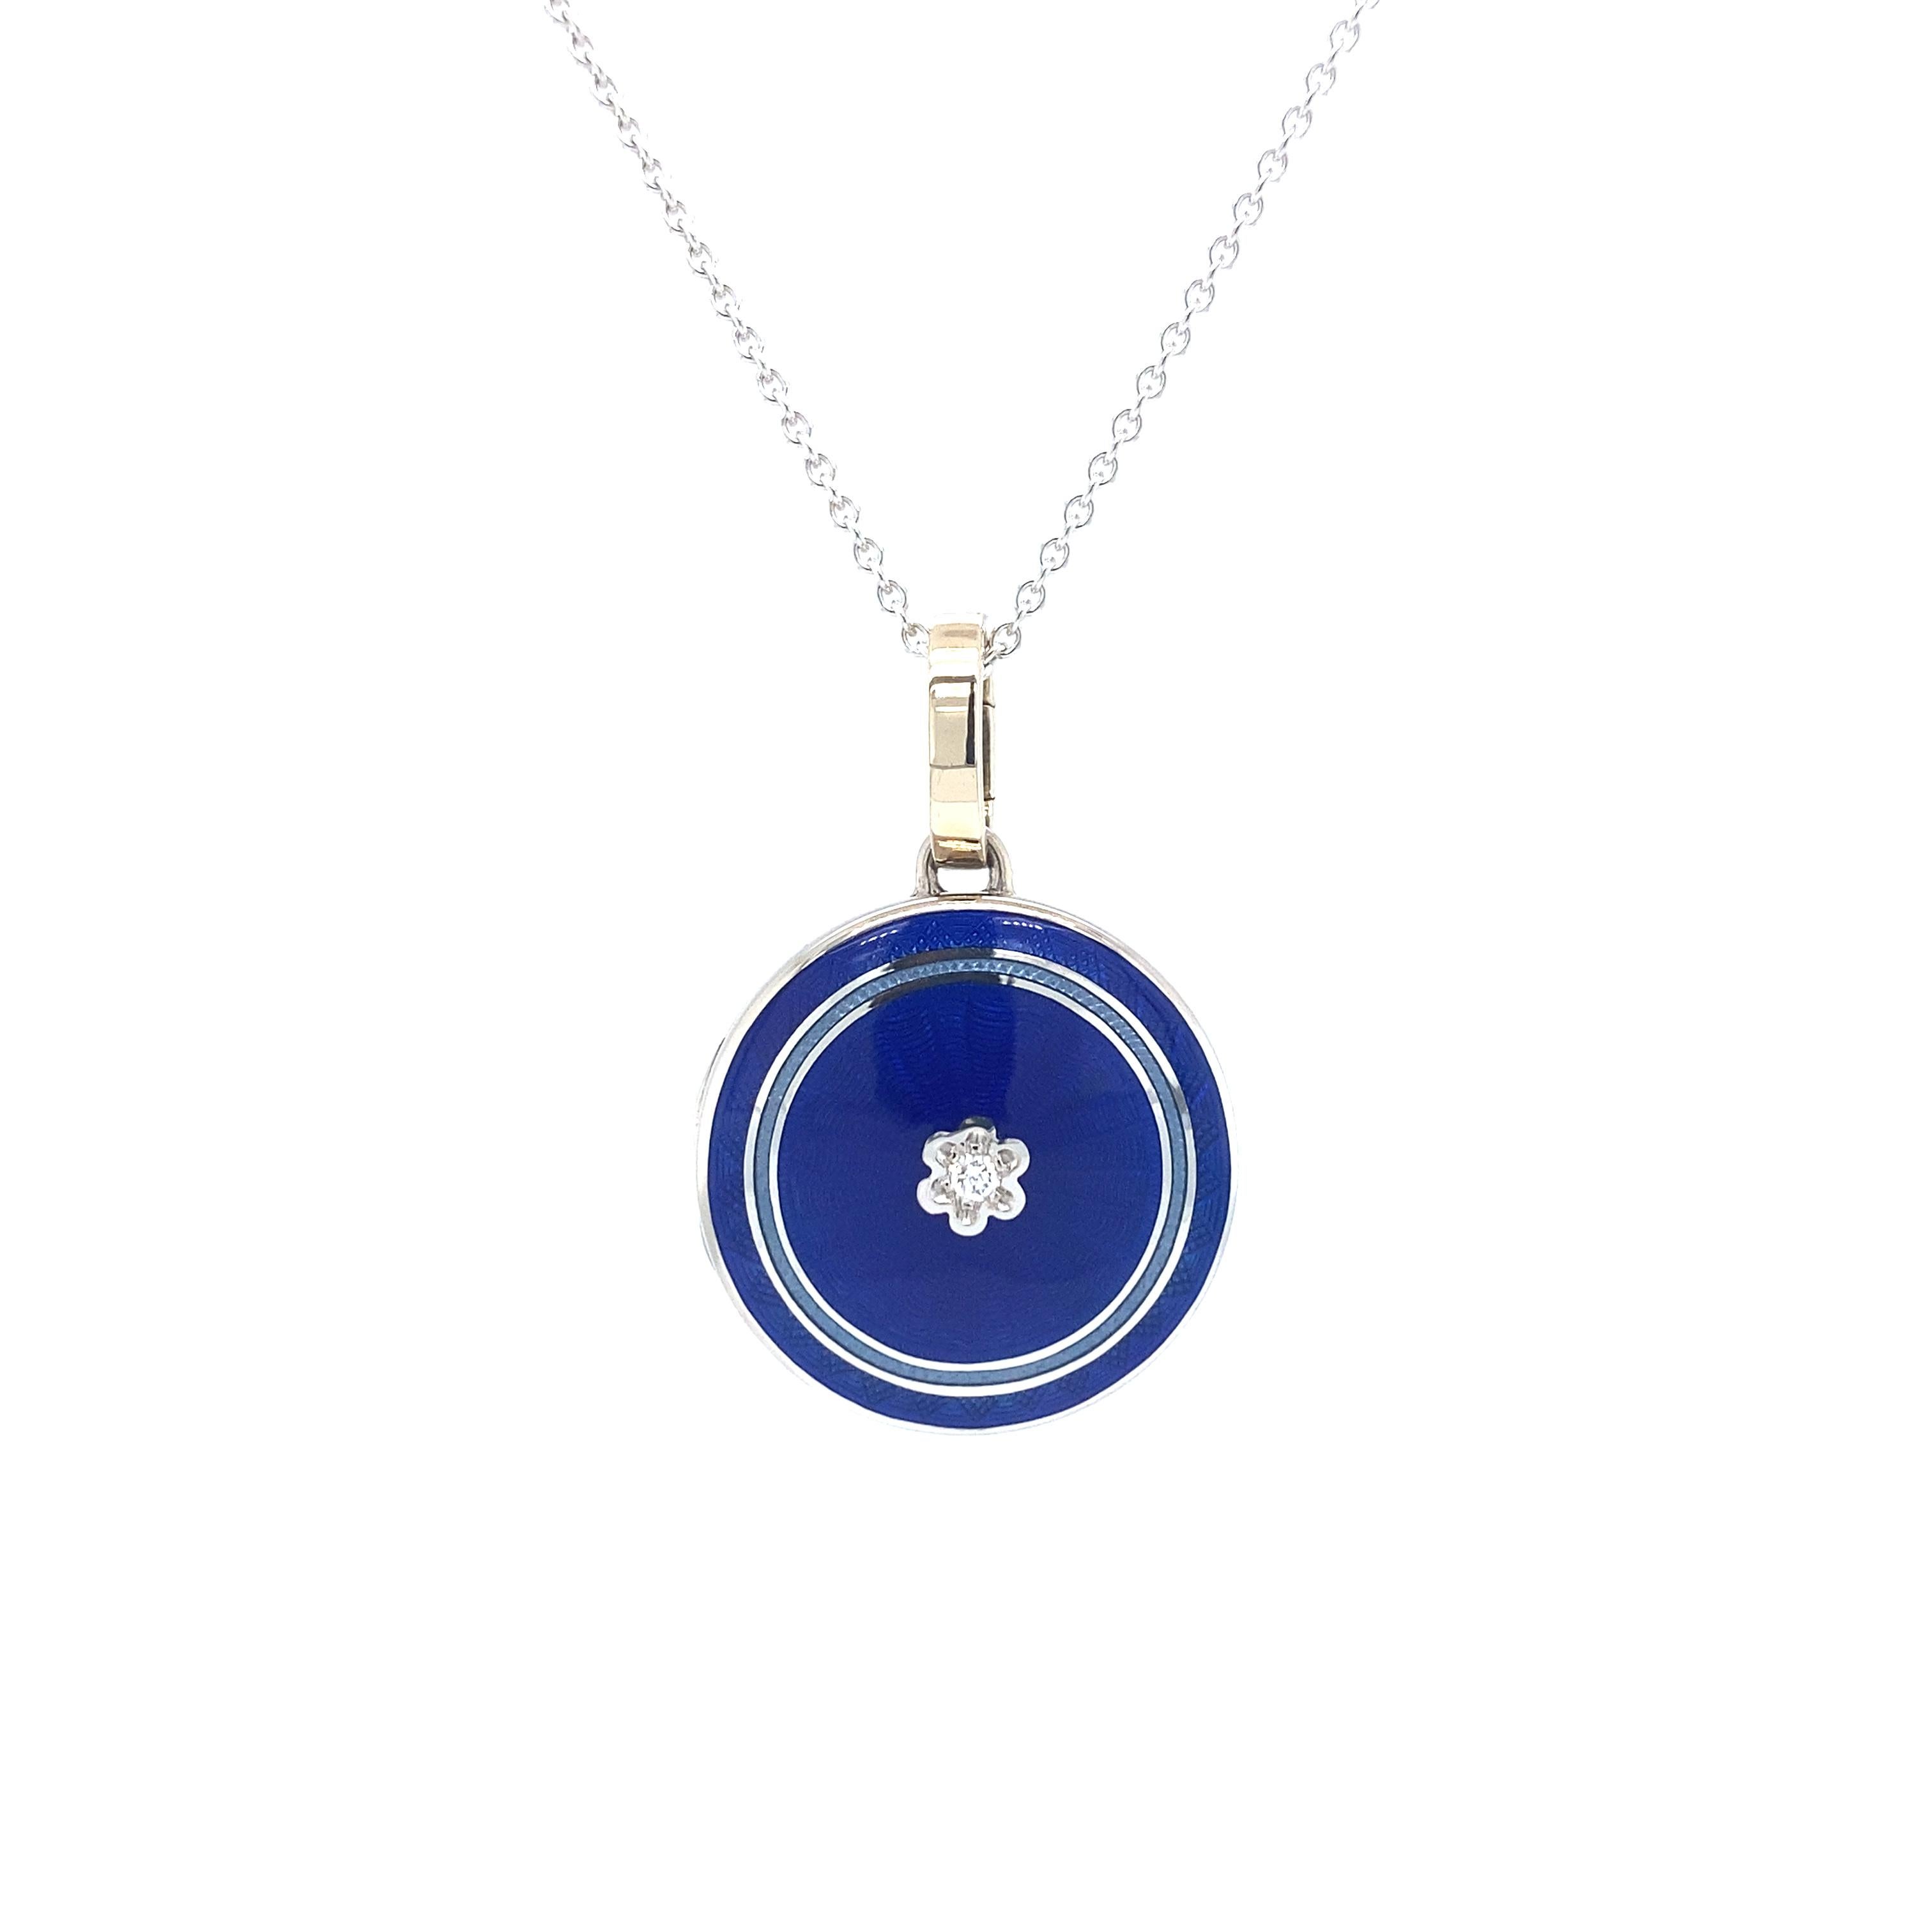 Victor Mayer round locket pendant in 18k white gold with royal blue vitreous enamel and 1 brilliant cut diamond total 0.03 ct, H VS

About the creator Victor Mayer 
Victor Mayer is internationally renowned for elegant timeless designs and unrivalled